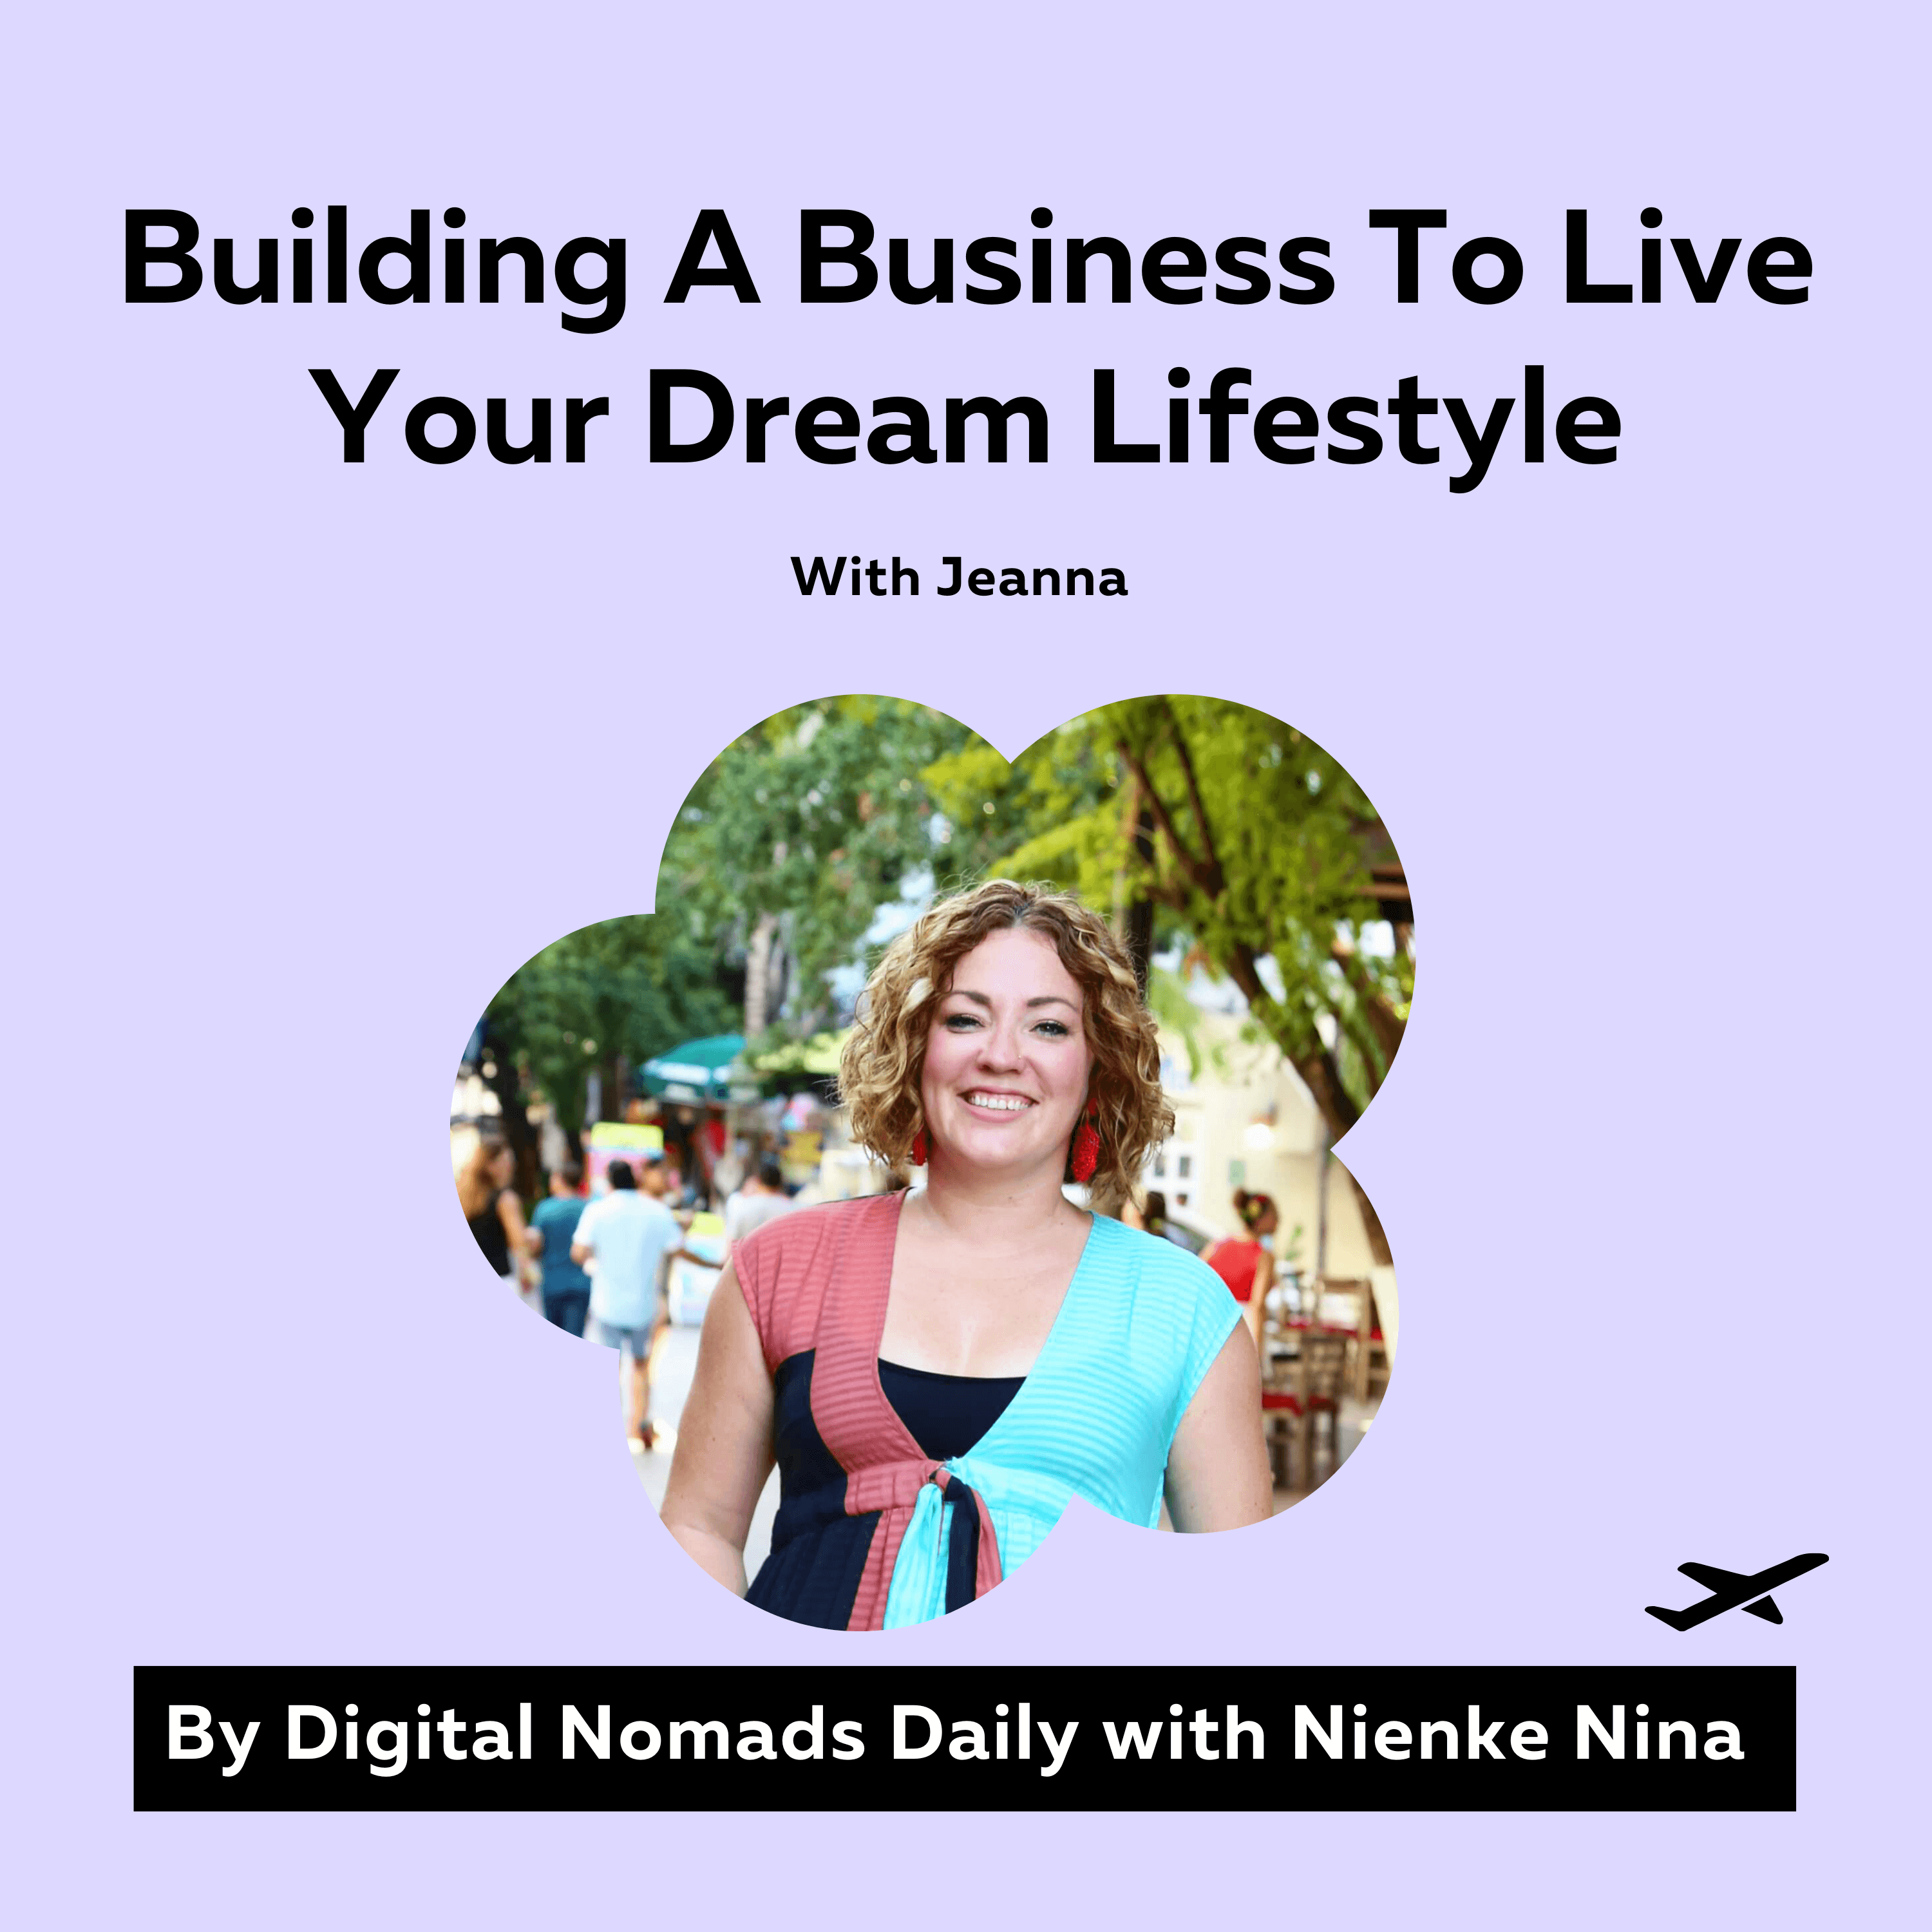 Cover digital nomads daily podcast Building A Business To Live Your Dream Lifestyle with Jeanna (1)